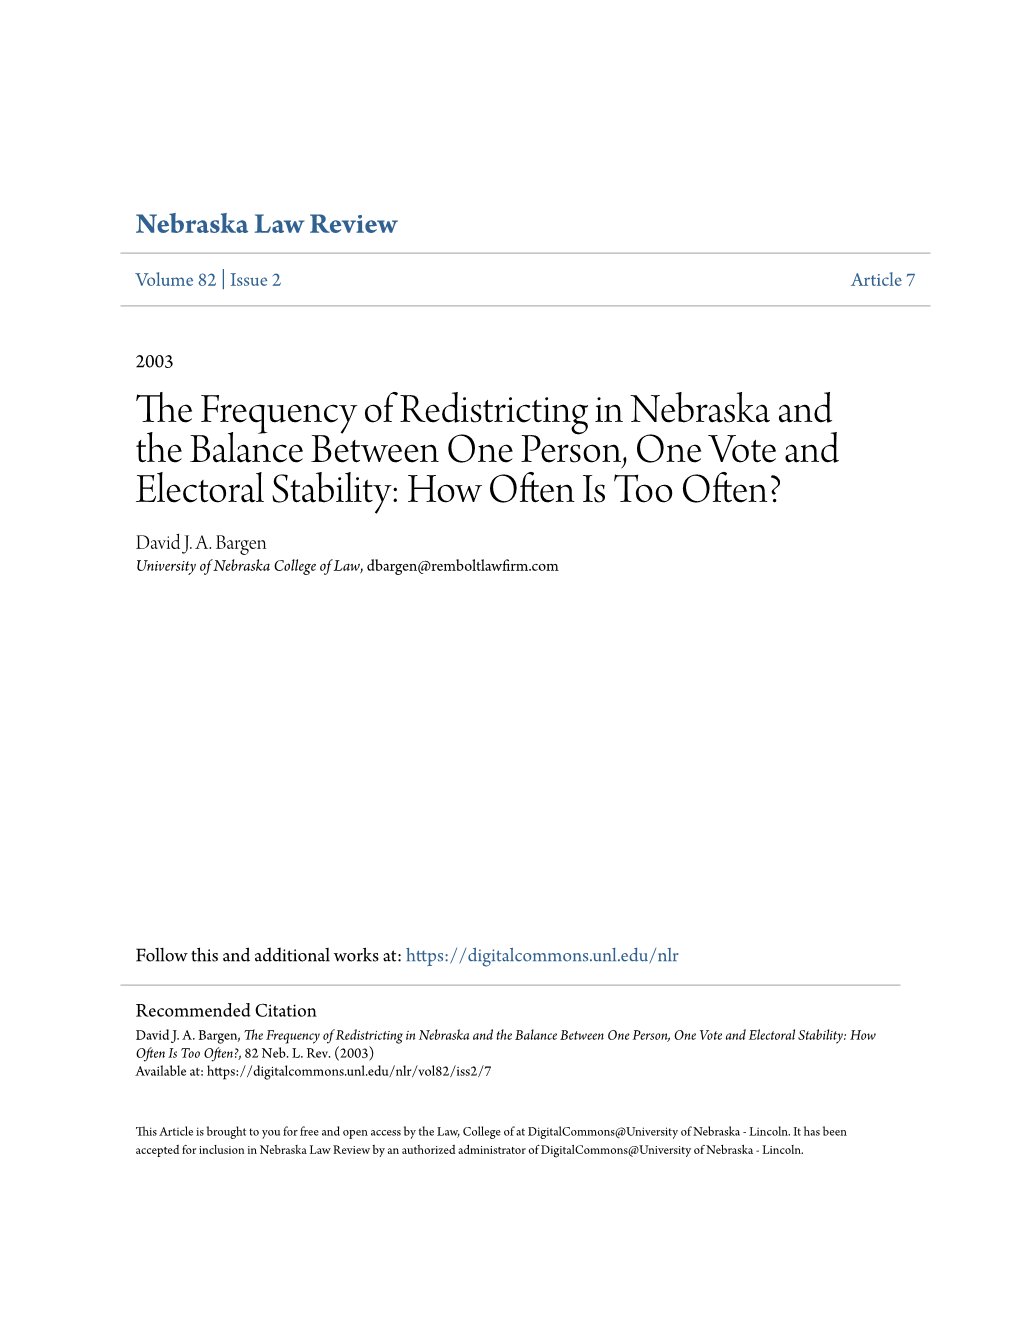 The Frequency of Redistricting in Nebraska and the Balance Between One Person, One Vote and Electoral Stability: How Often Is Too Often?, 82 Neb